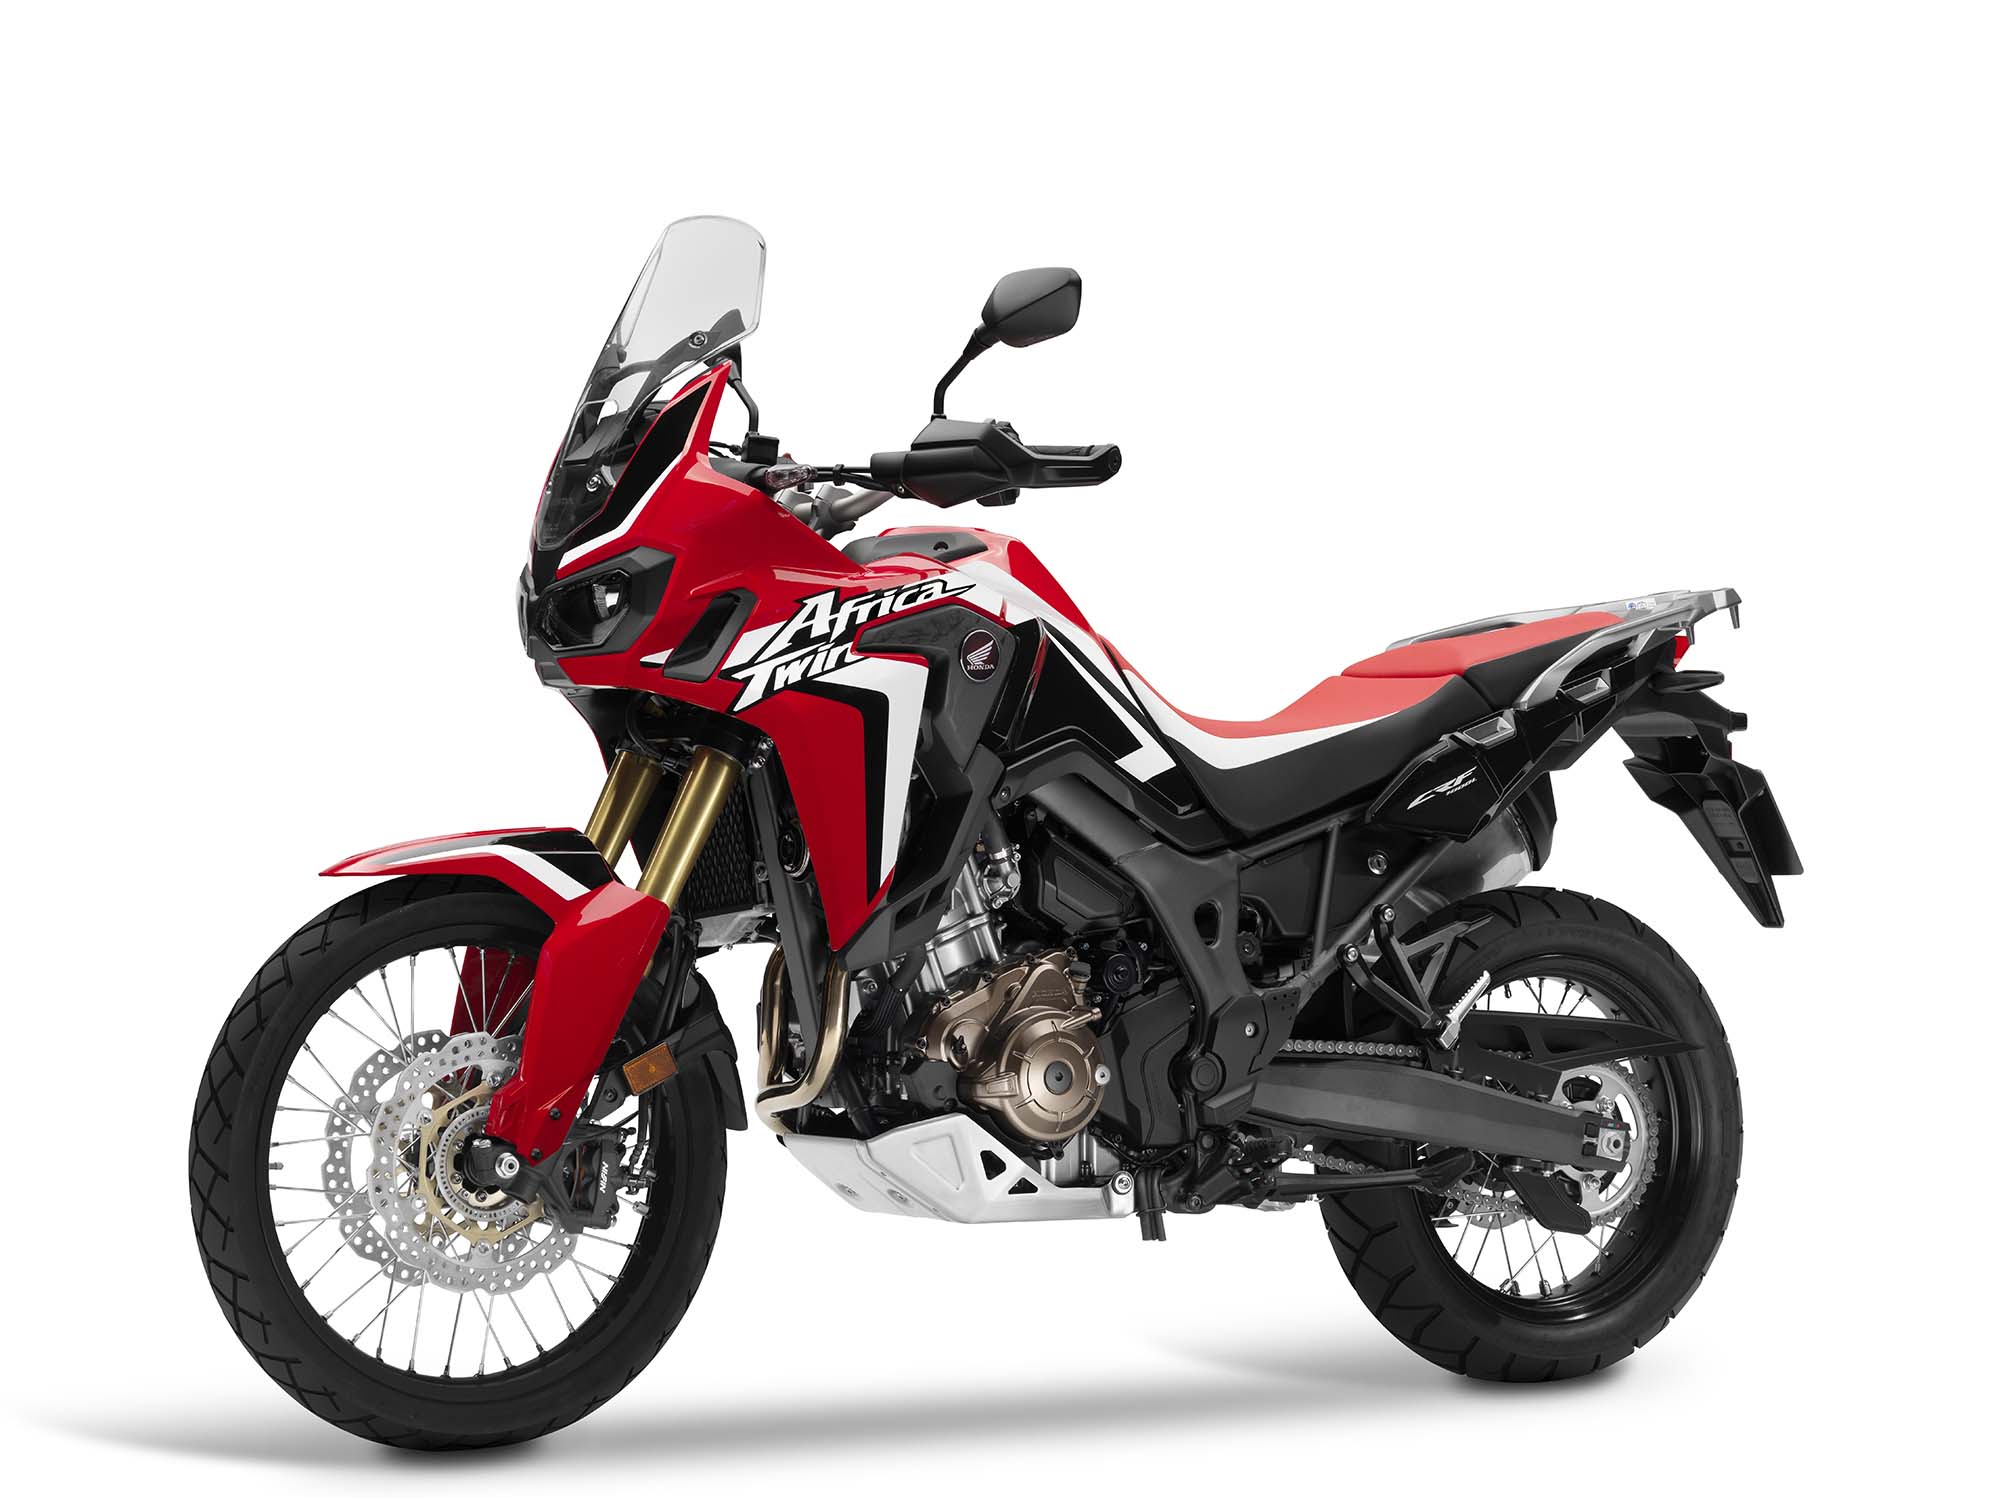 Honda africa twin engine specifications #7